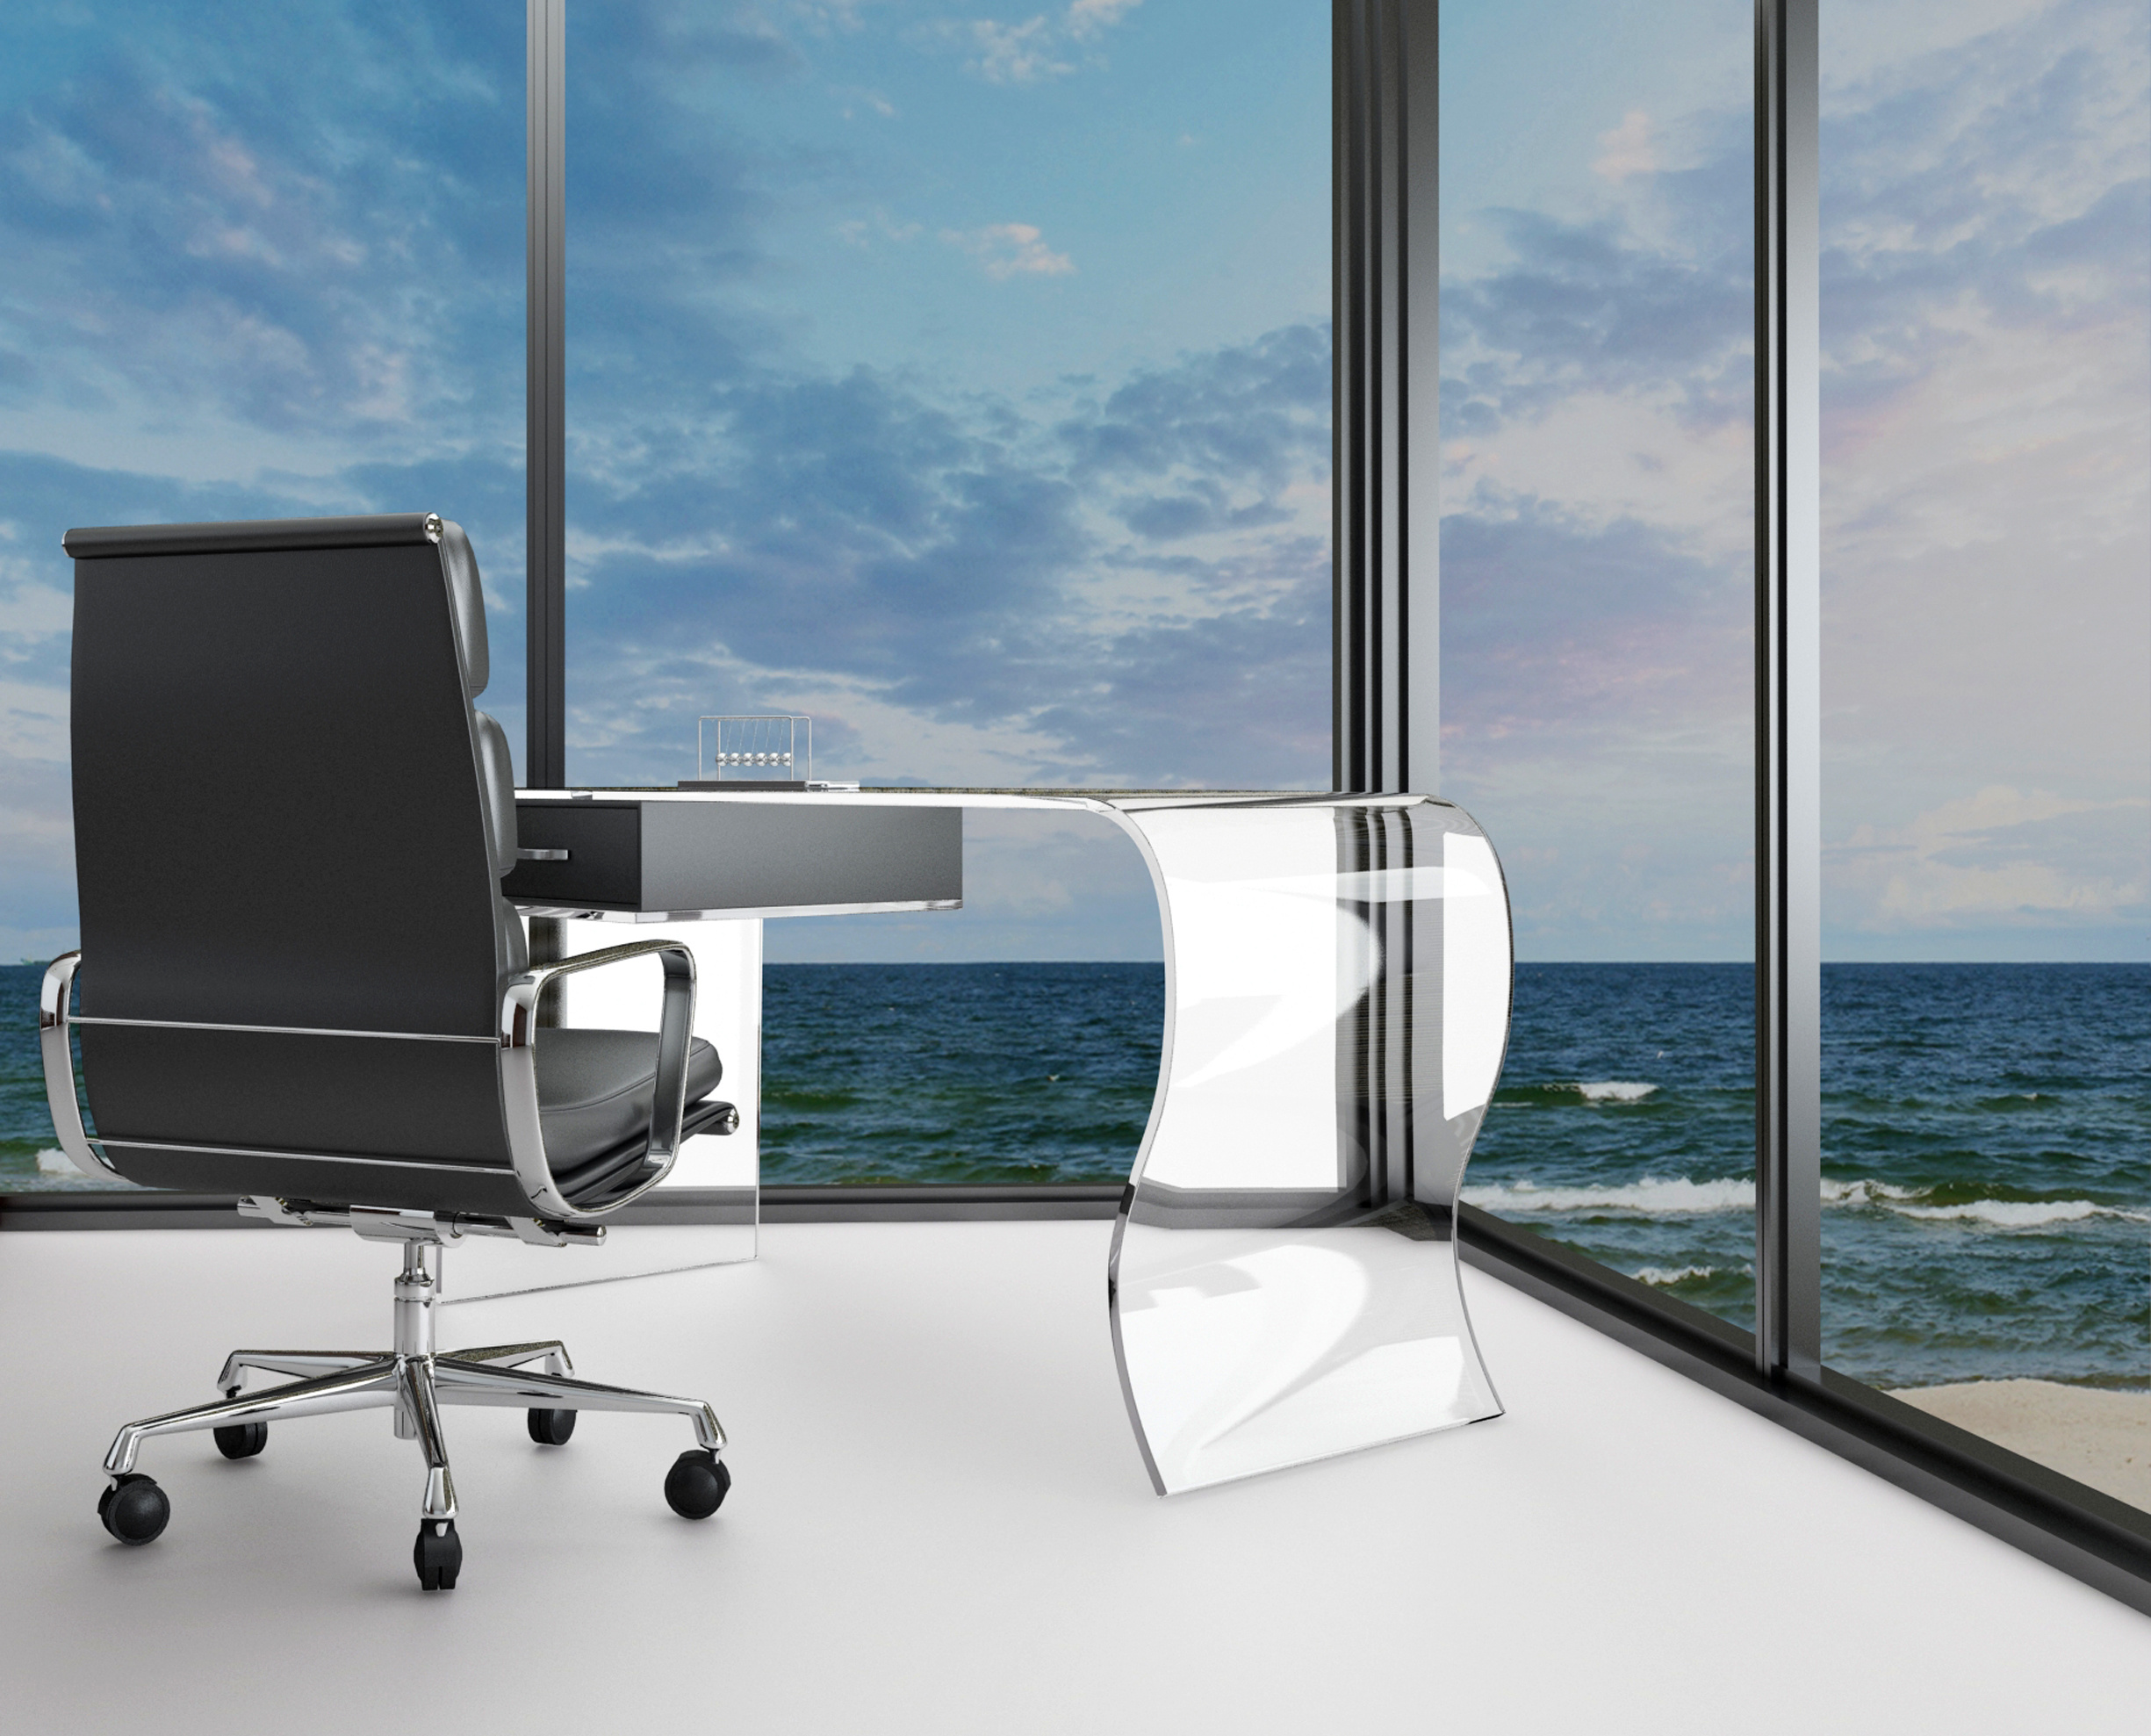 Modern Office Seascape Room with desk and chair - Ace Janitorial Services